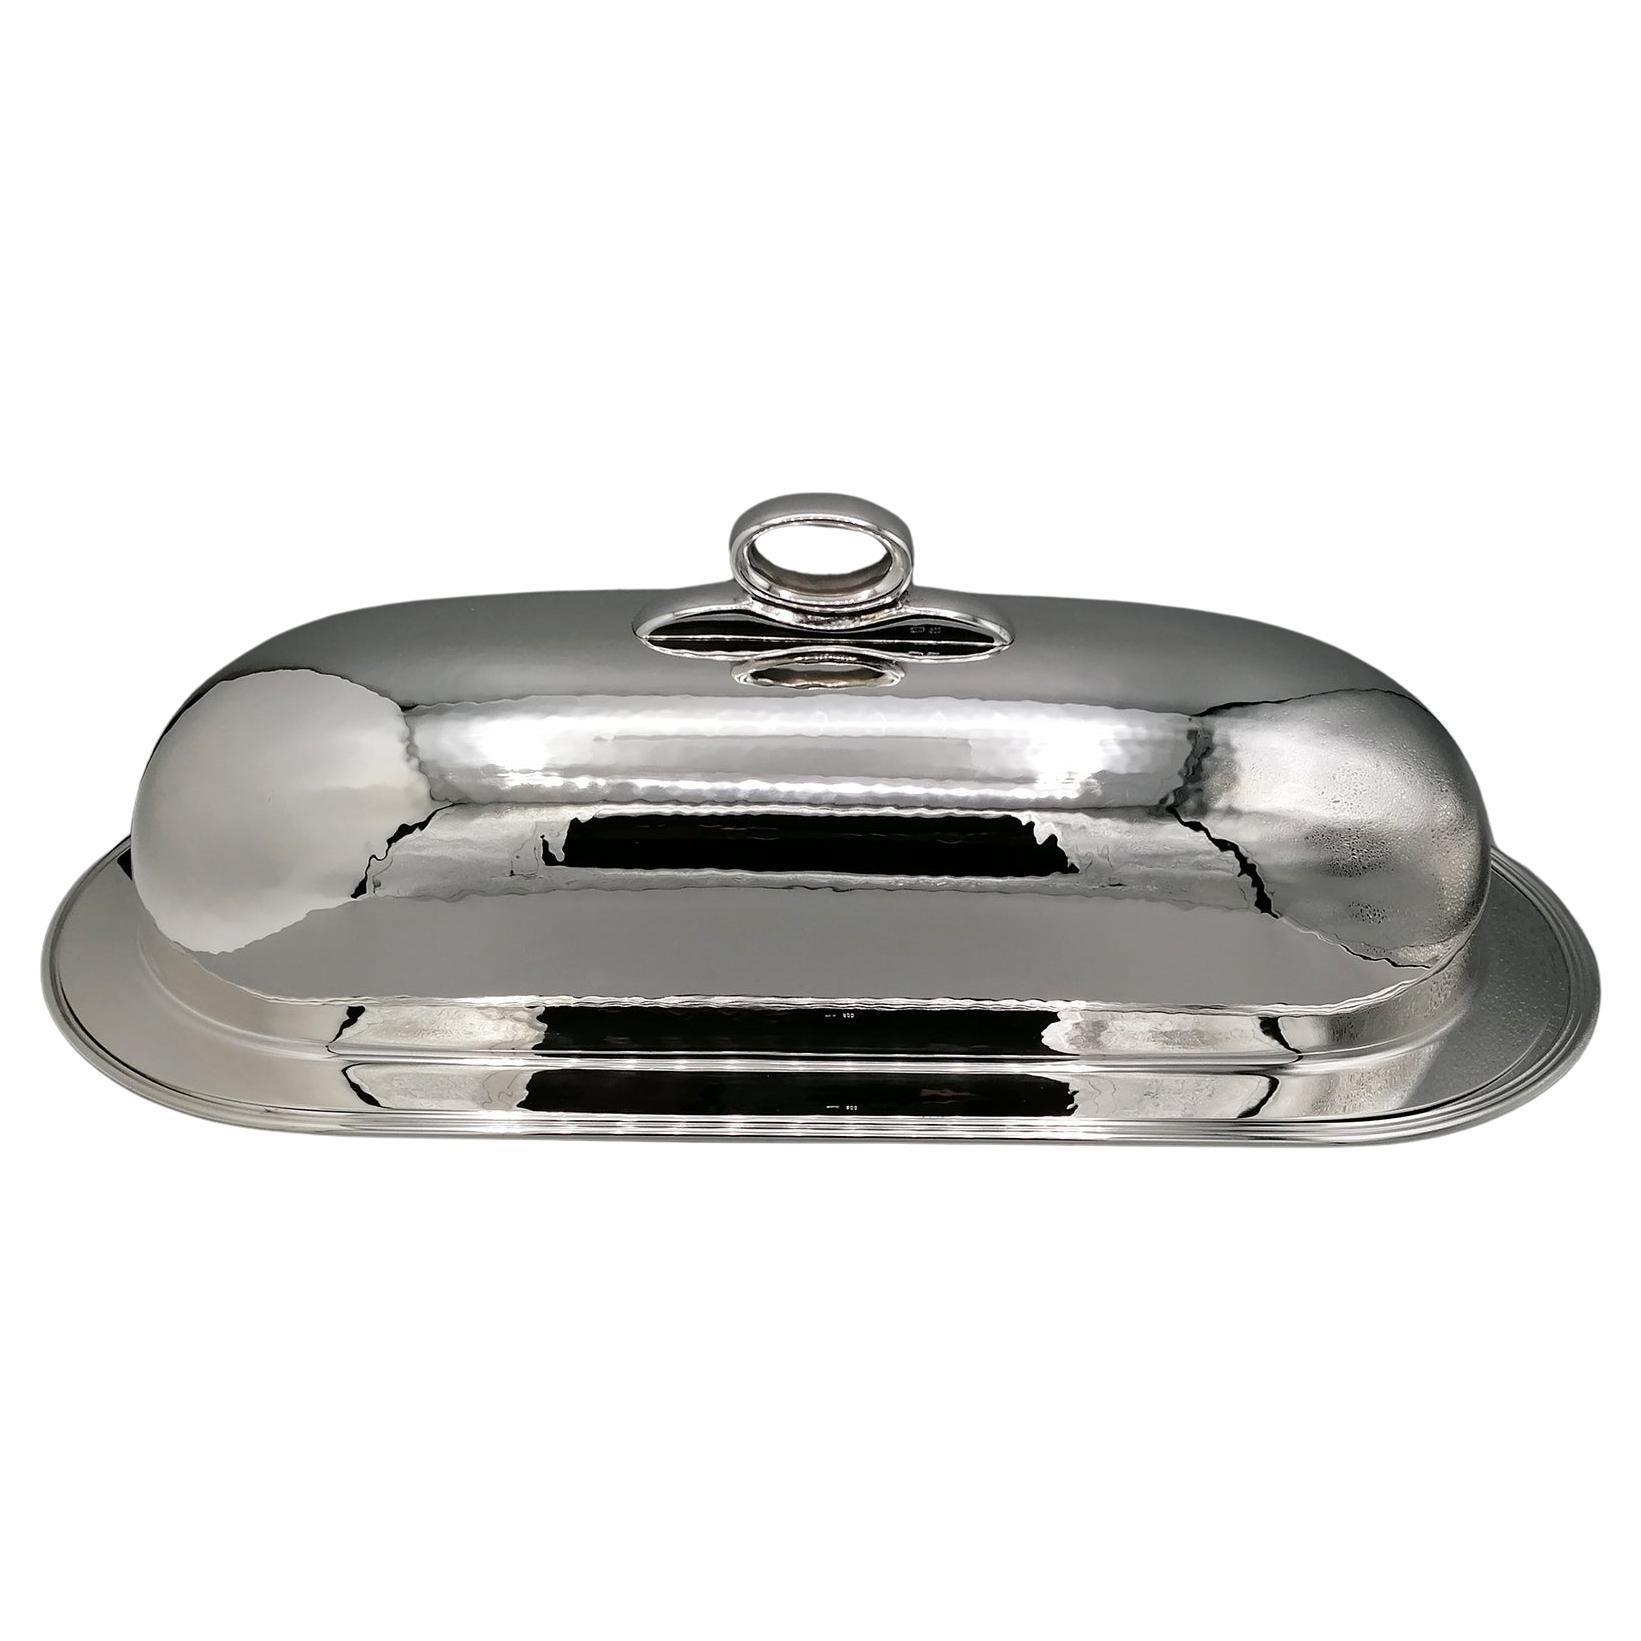 Italie Solid Silver 800 Meet dish with lid